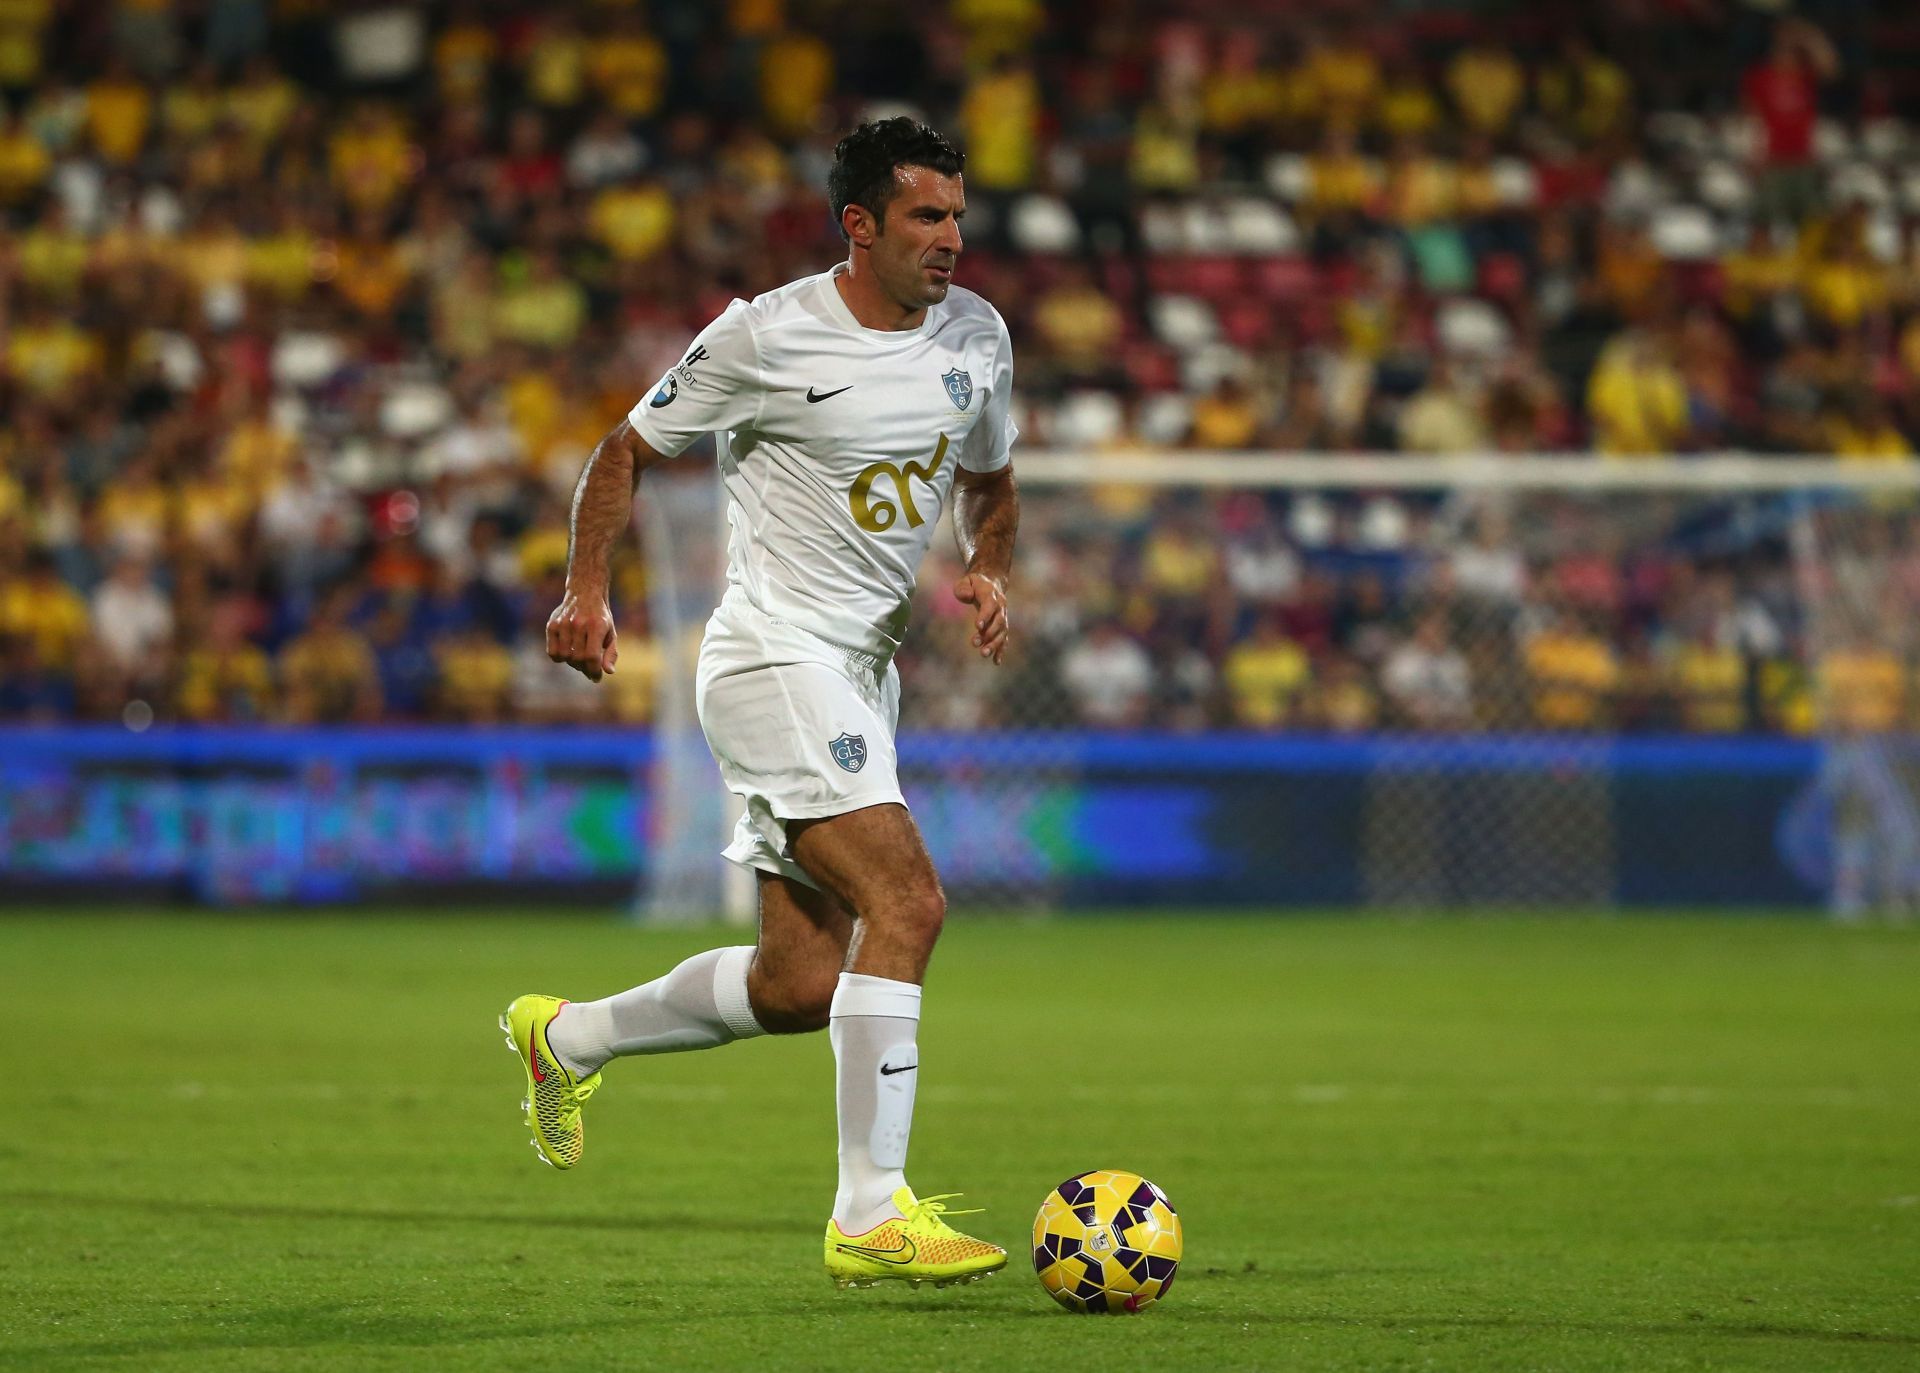 Luis Figo embarks on a run during a Global Legend Series game.